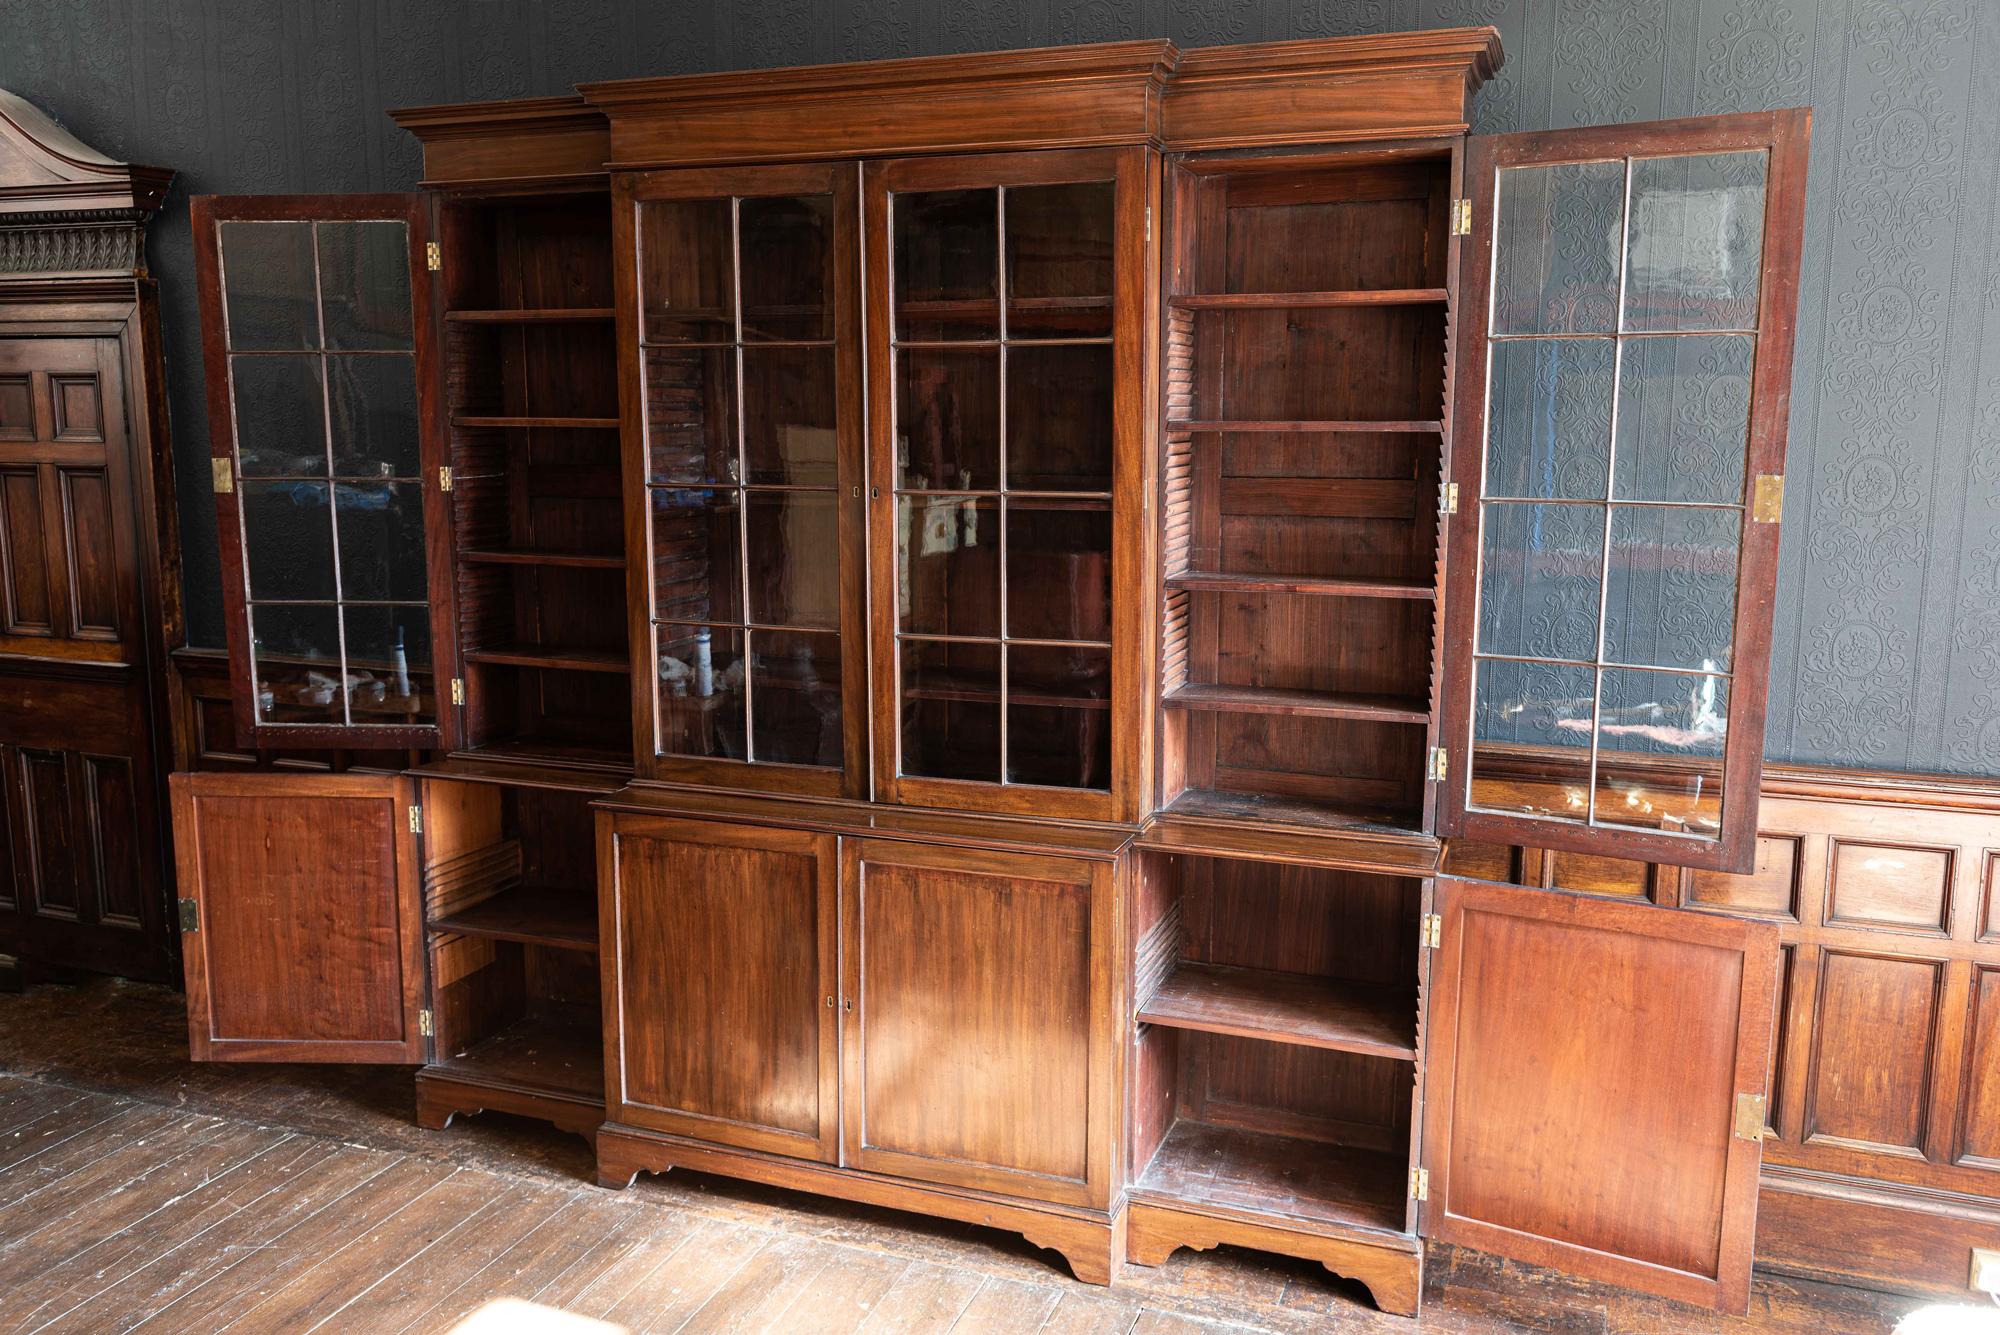 English mahogany breakfront library bookcase,
circa 1900.

Stepped cornice and fitted with adjustable shelves enclosed four glazed and four paneled doors, bracket feet. All original including hand blown glass, brass locks, separates into 6